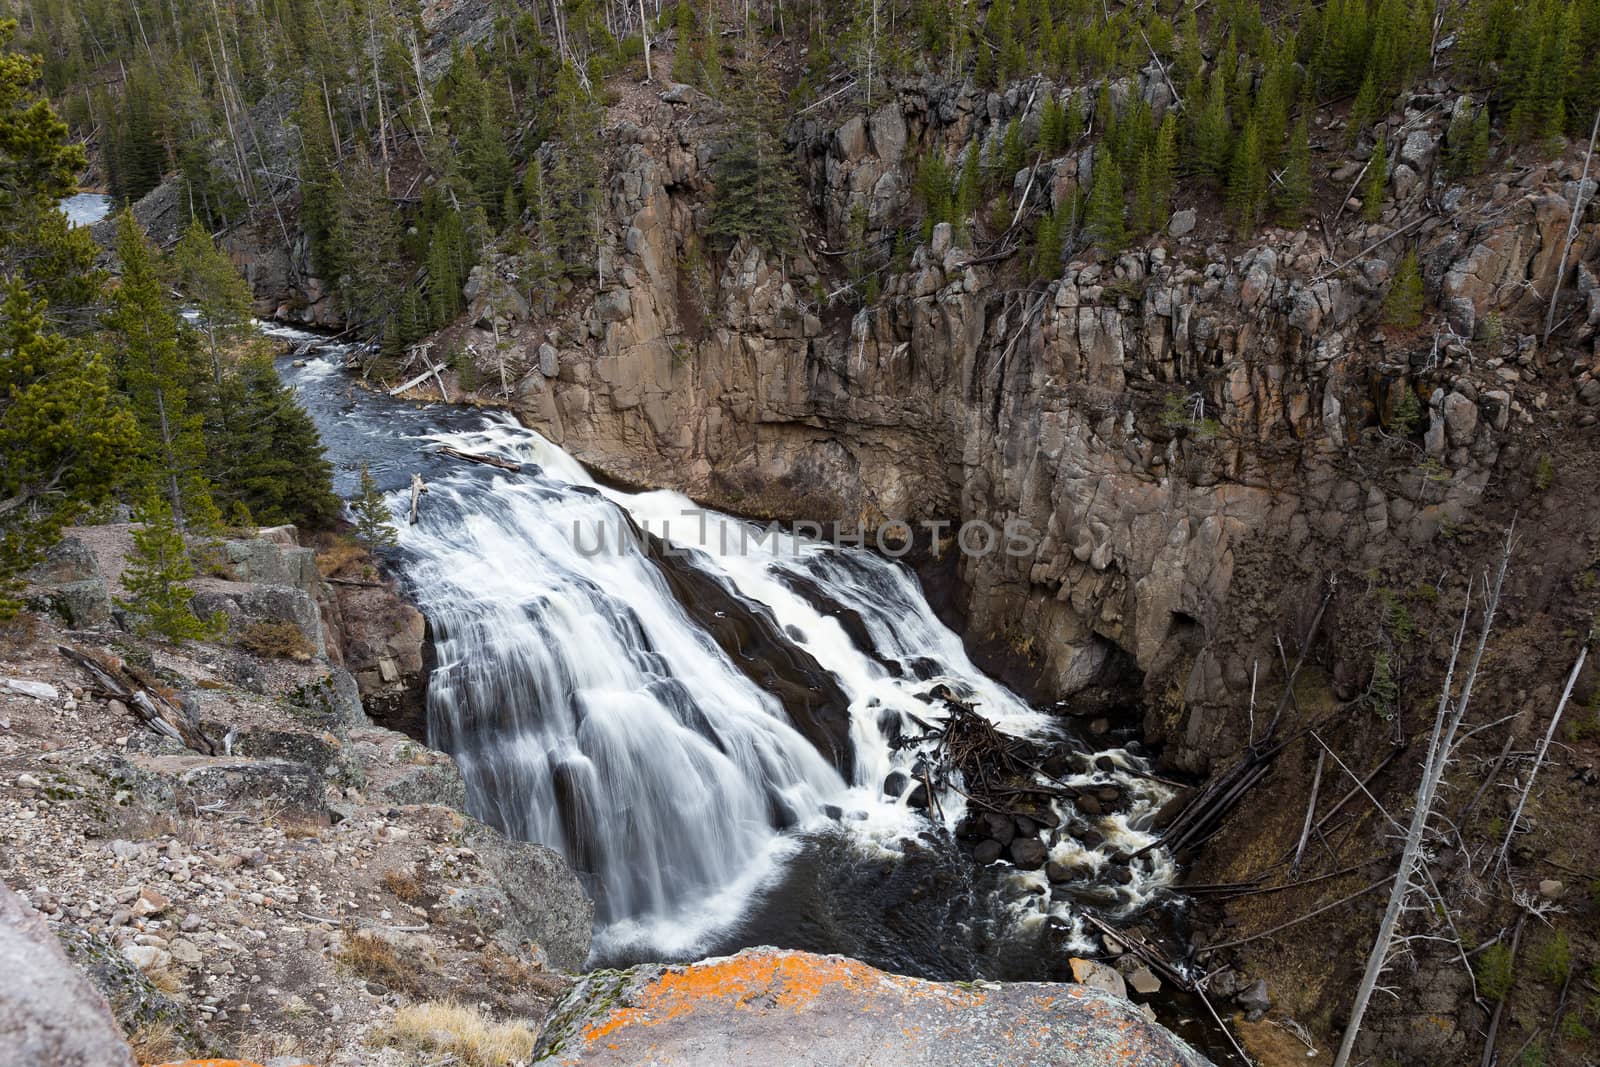 Looking out over Gibbon Falls in Yellowstone National Park.